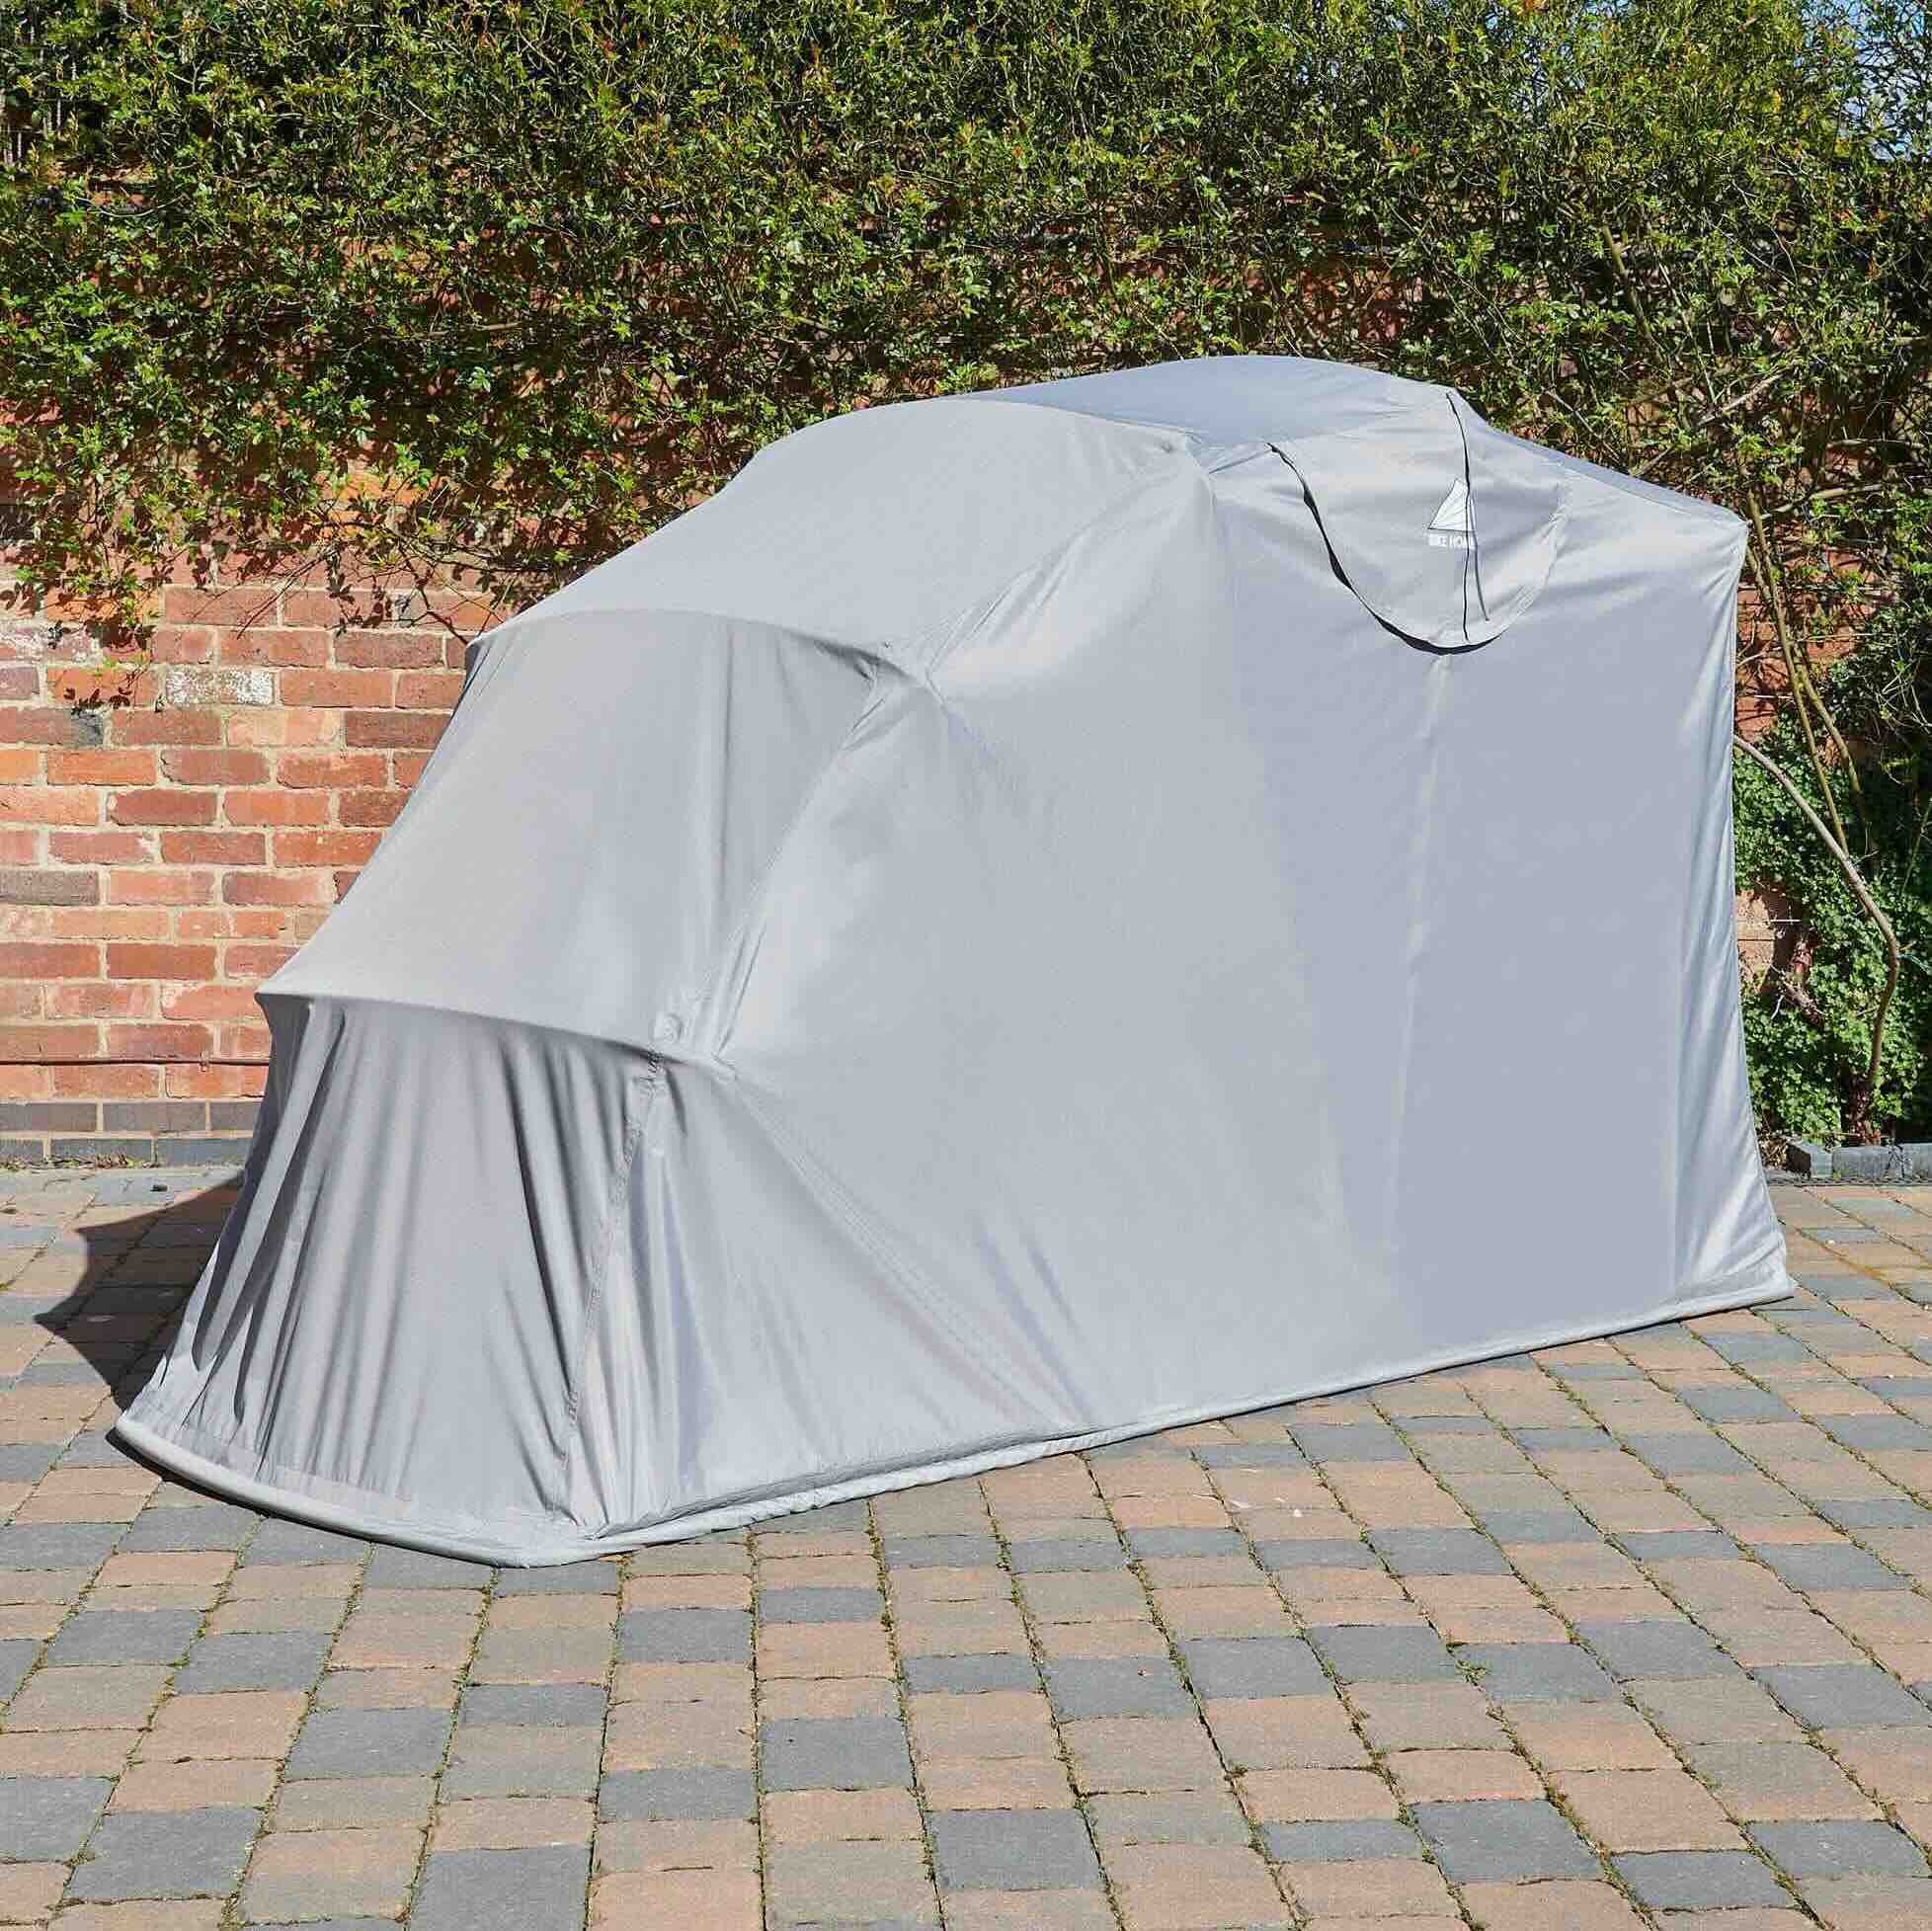 Motorcycle Cover Review: Protect Your Bike with the Best